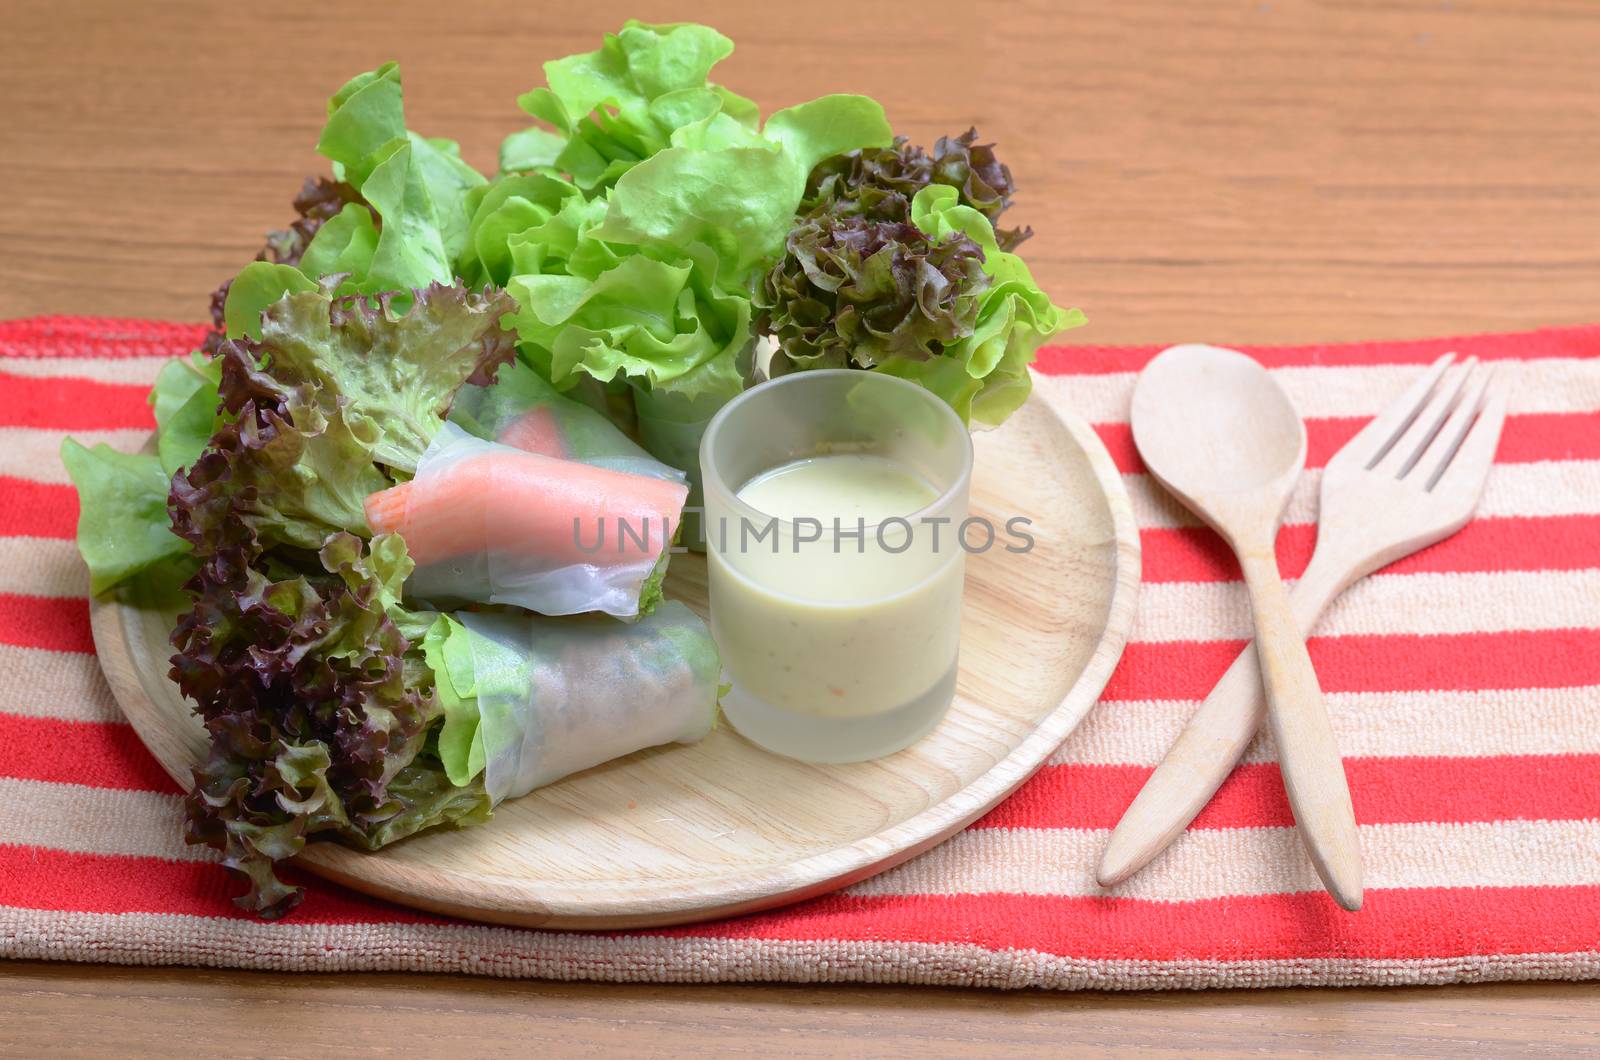 Salad roll vegetables and crab stick with salad dressing in wooden plate, folk and spoon.